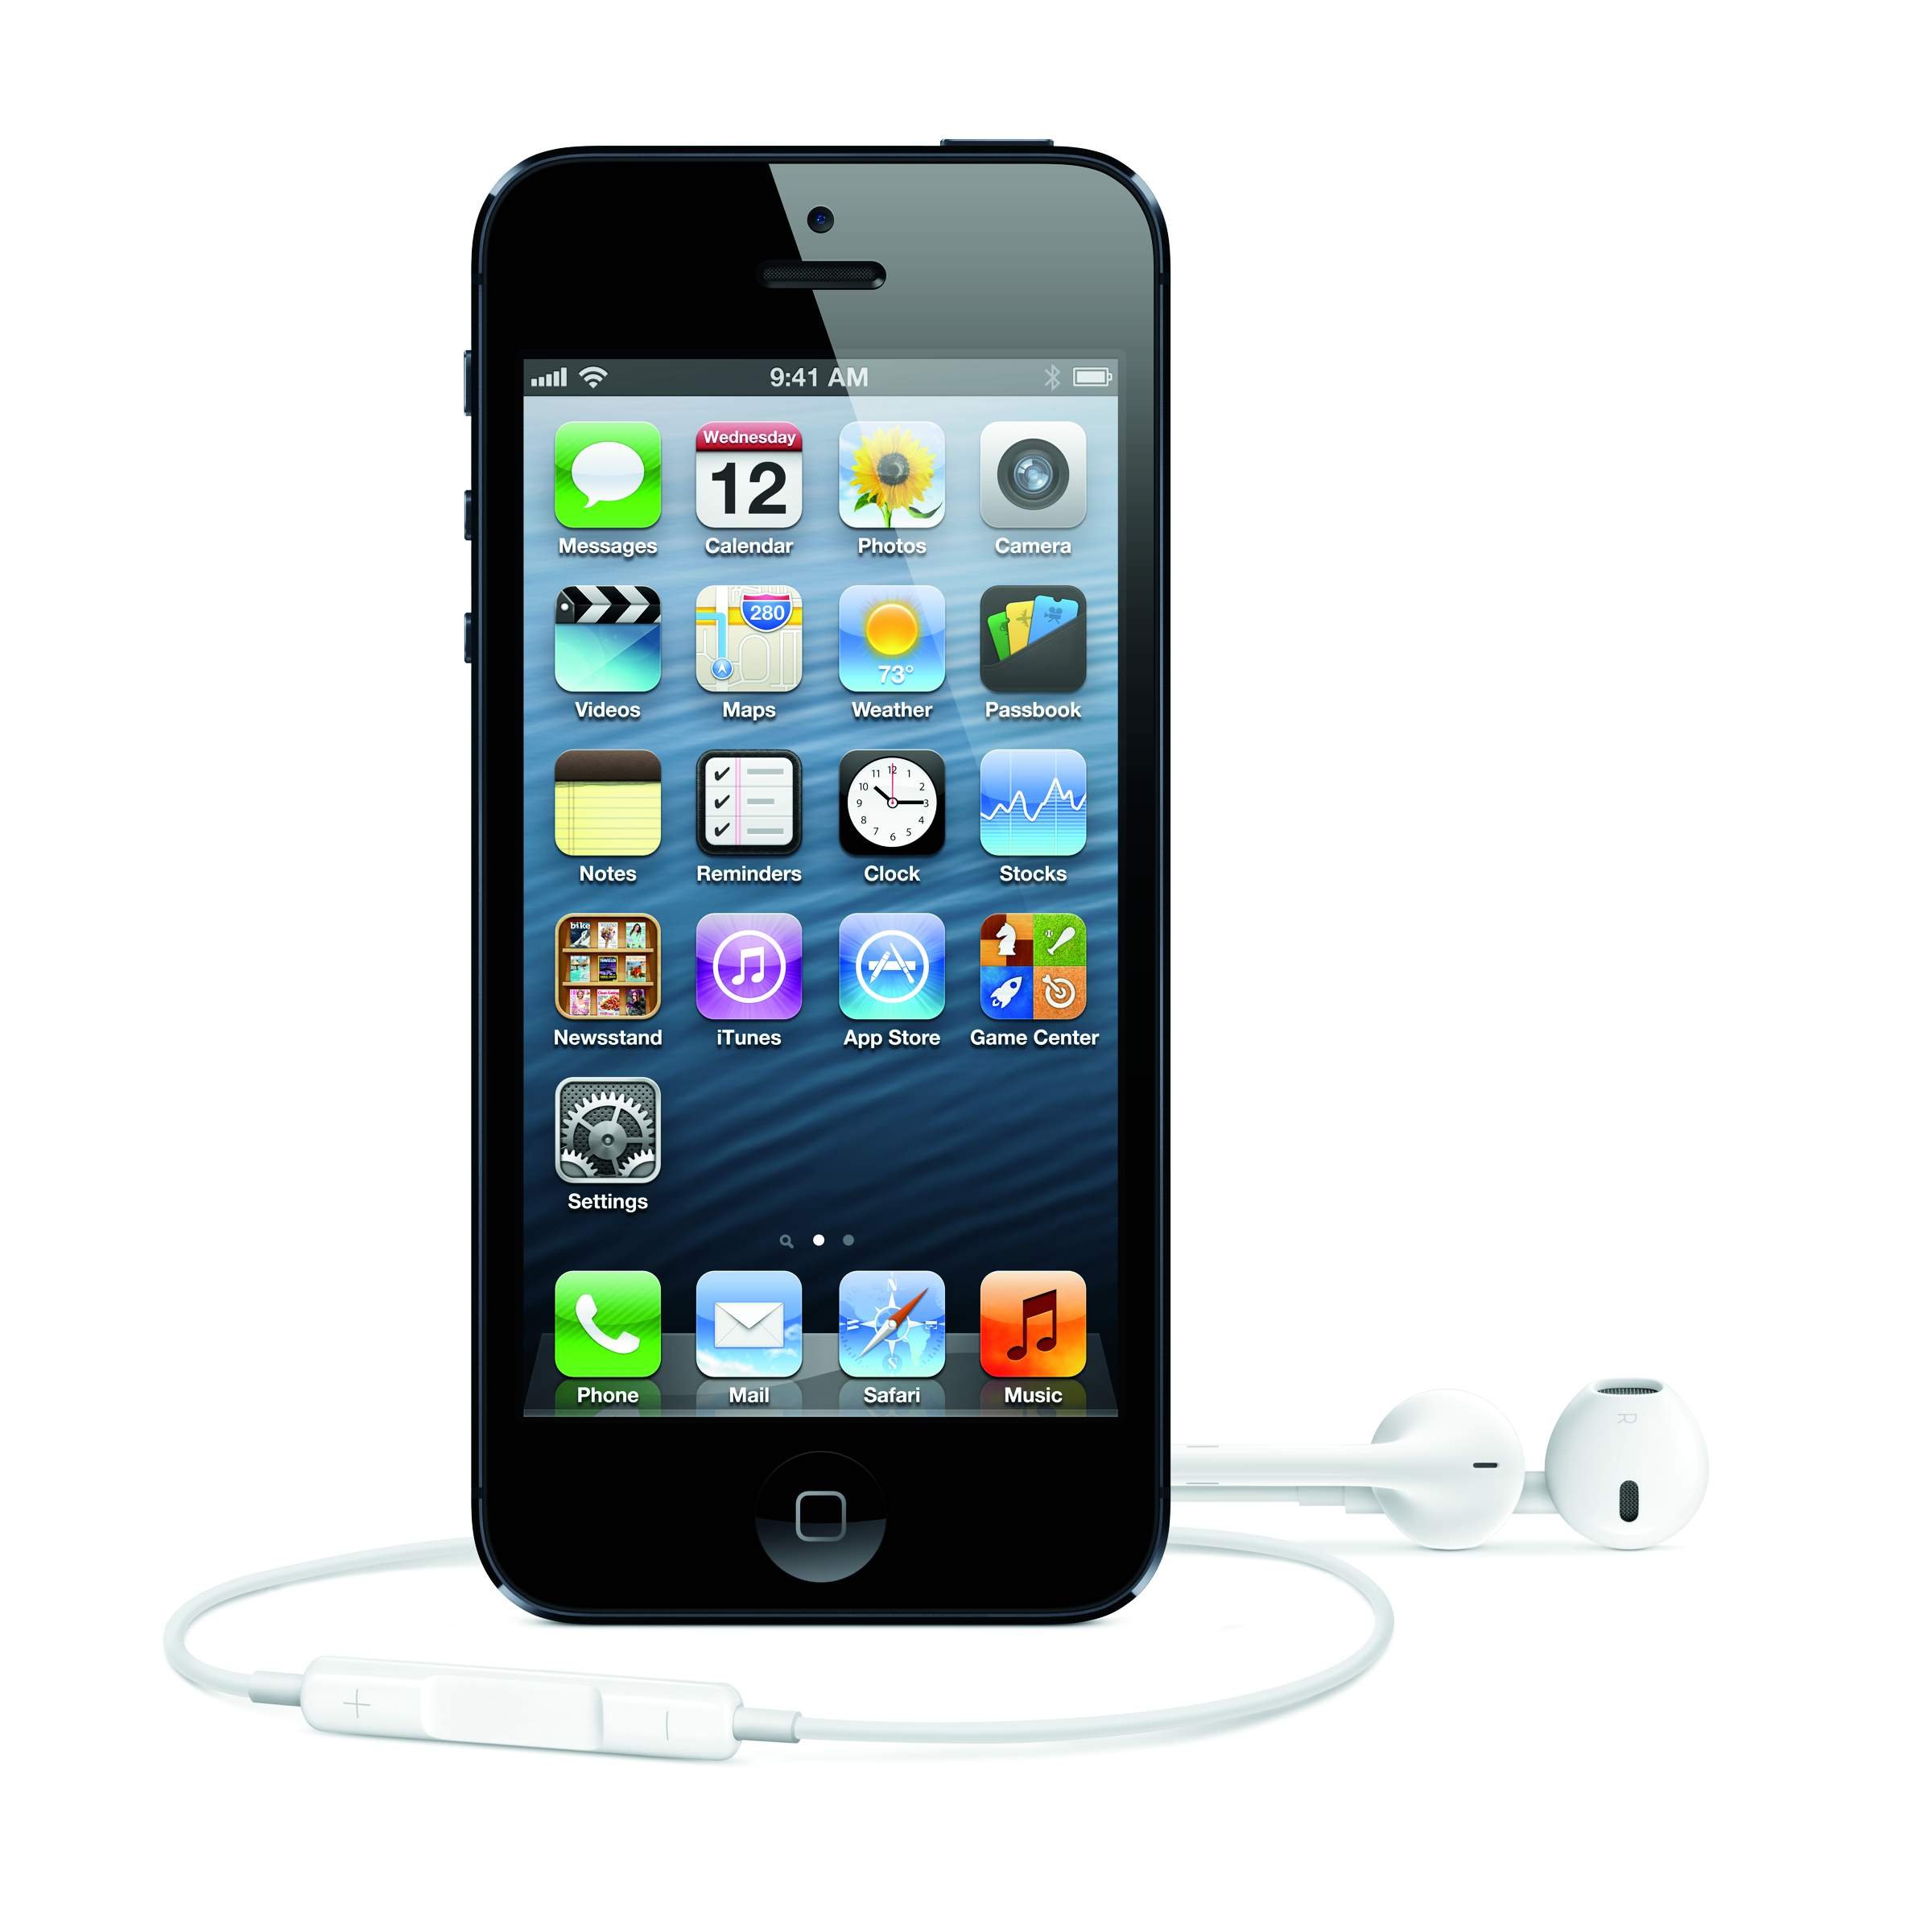 Apple continues reign in technology with iPhone 5 ...